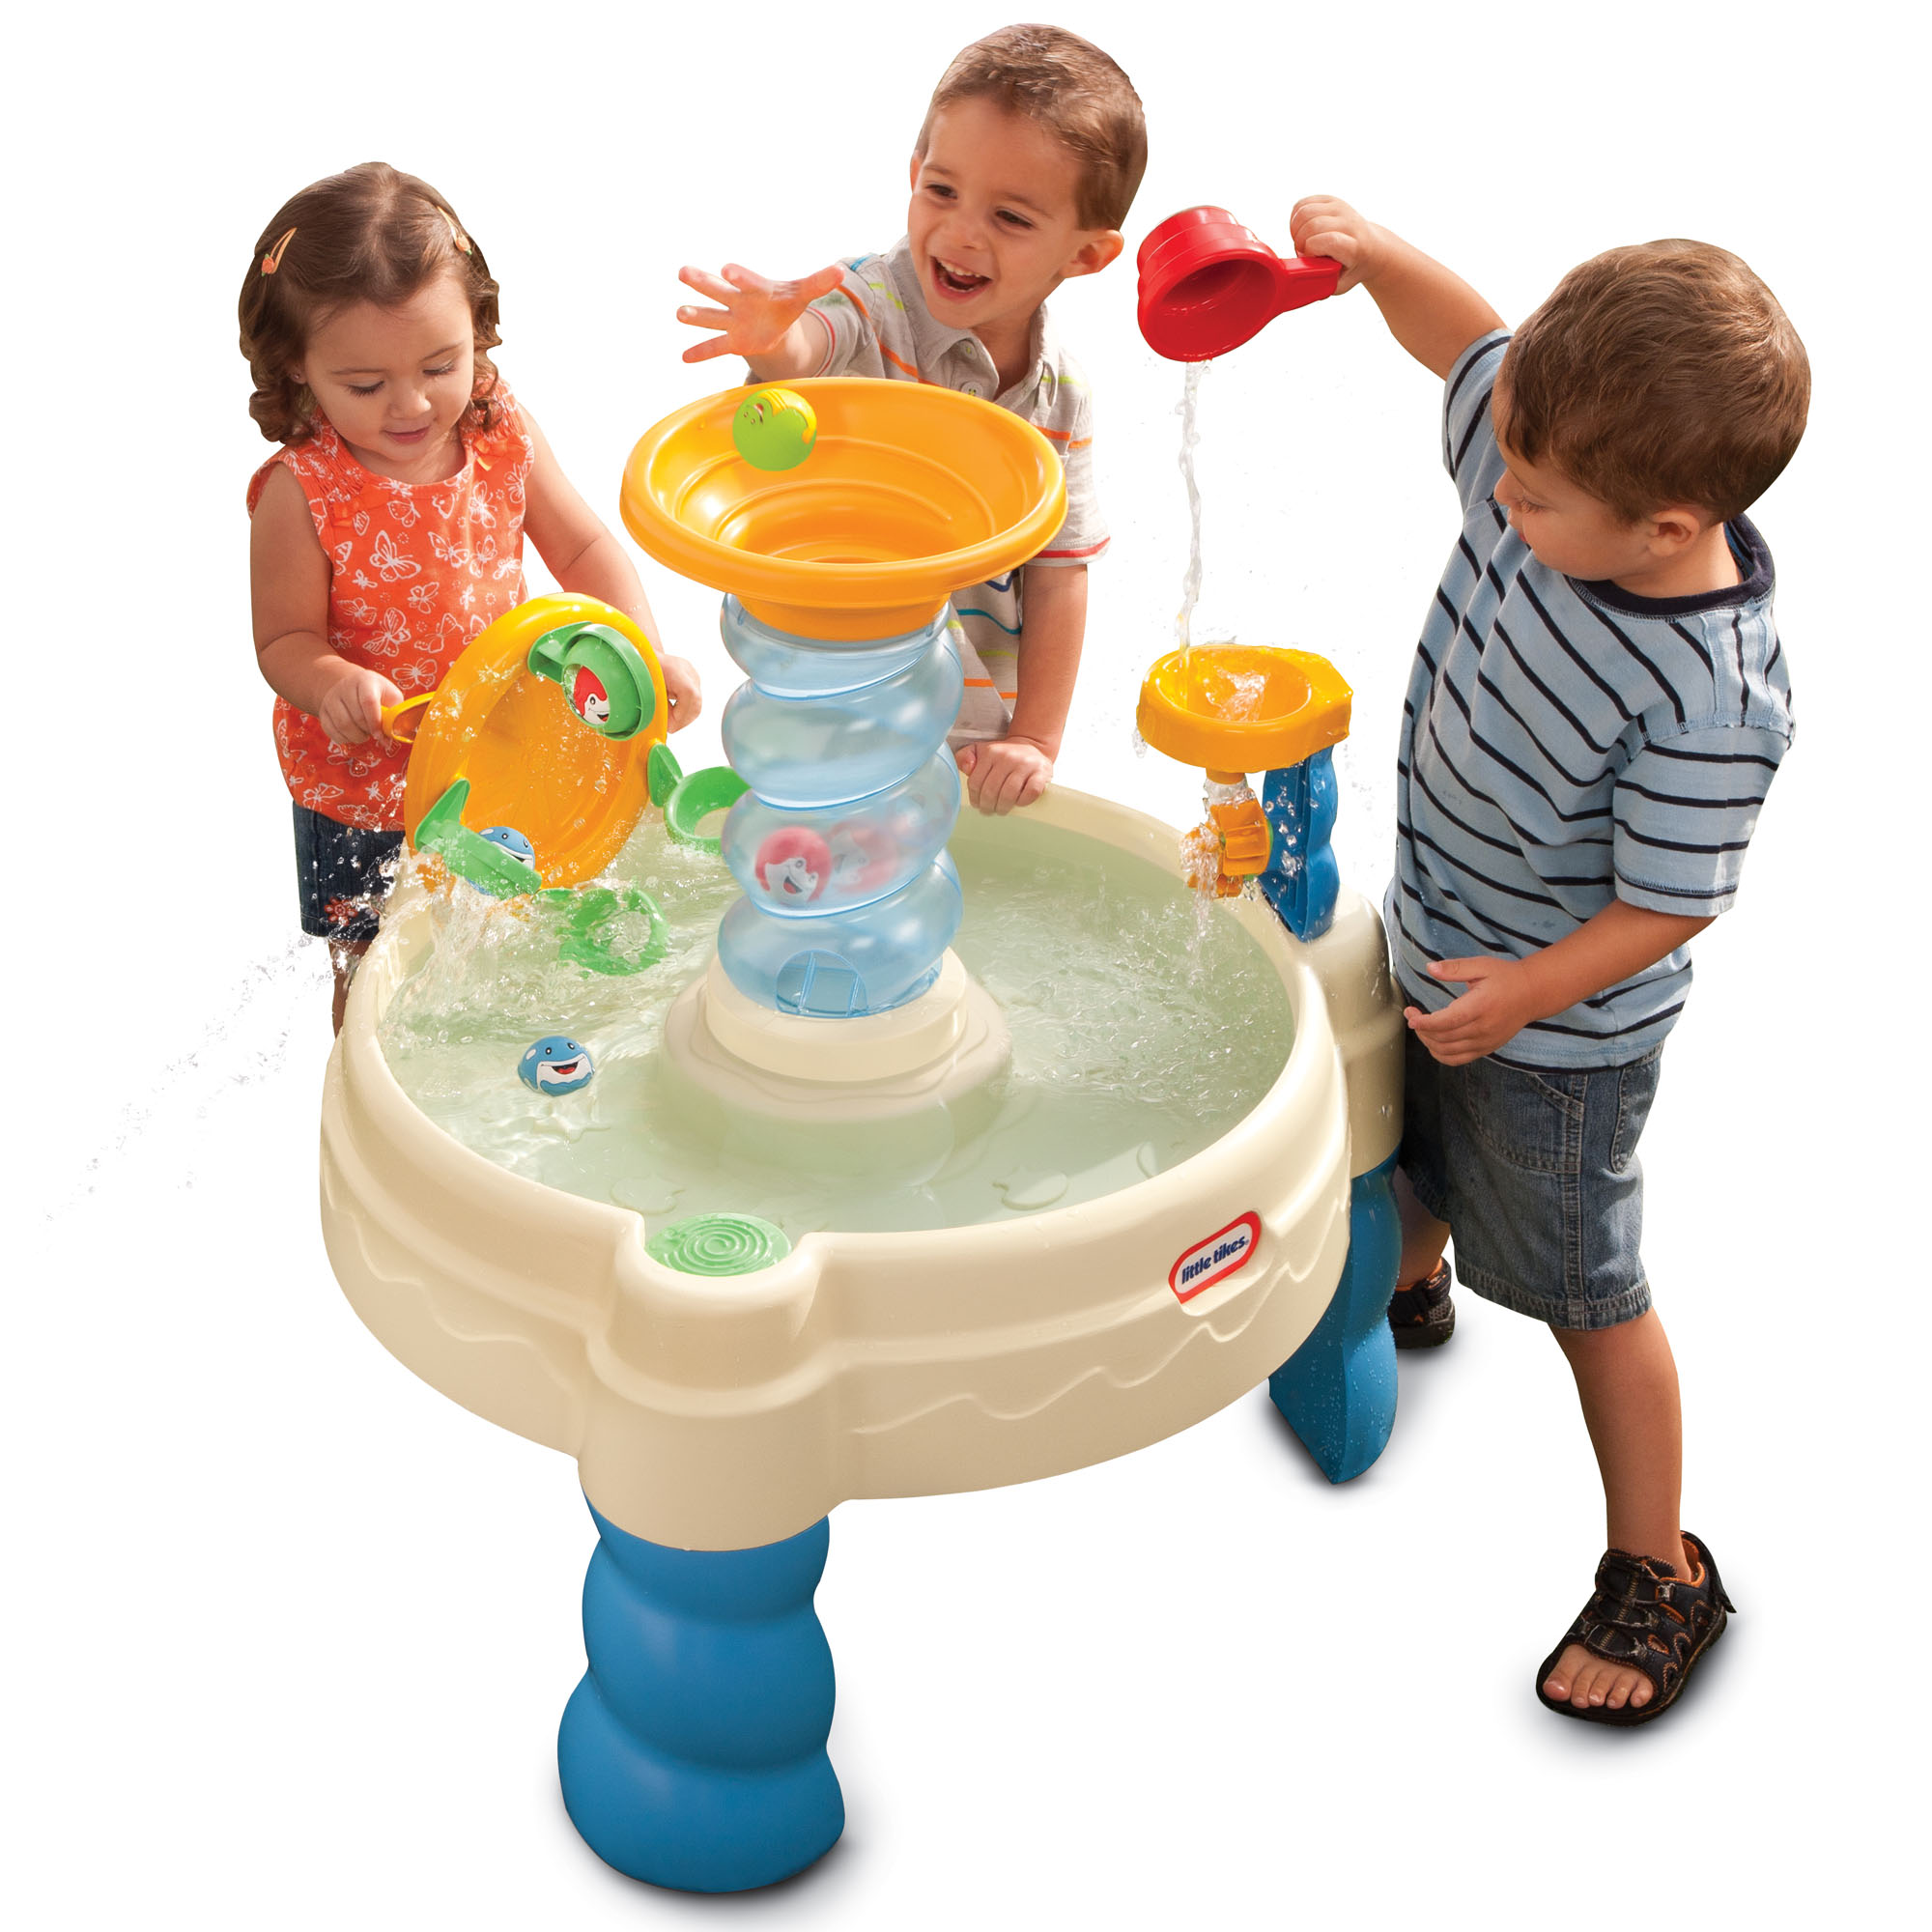 Little Tikes Spiralin' Seas Waterpark with Lazy River Splash Action for Kids 2+ Years - image 1 of 8